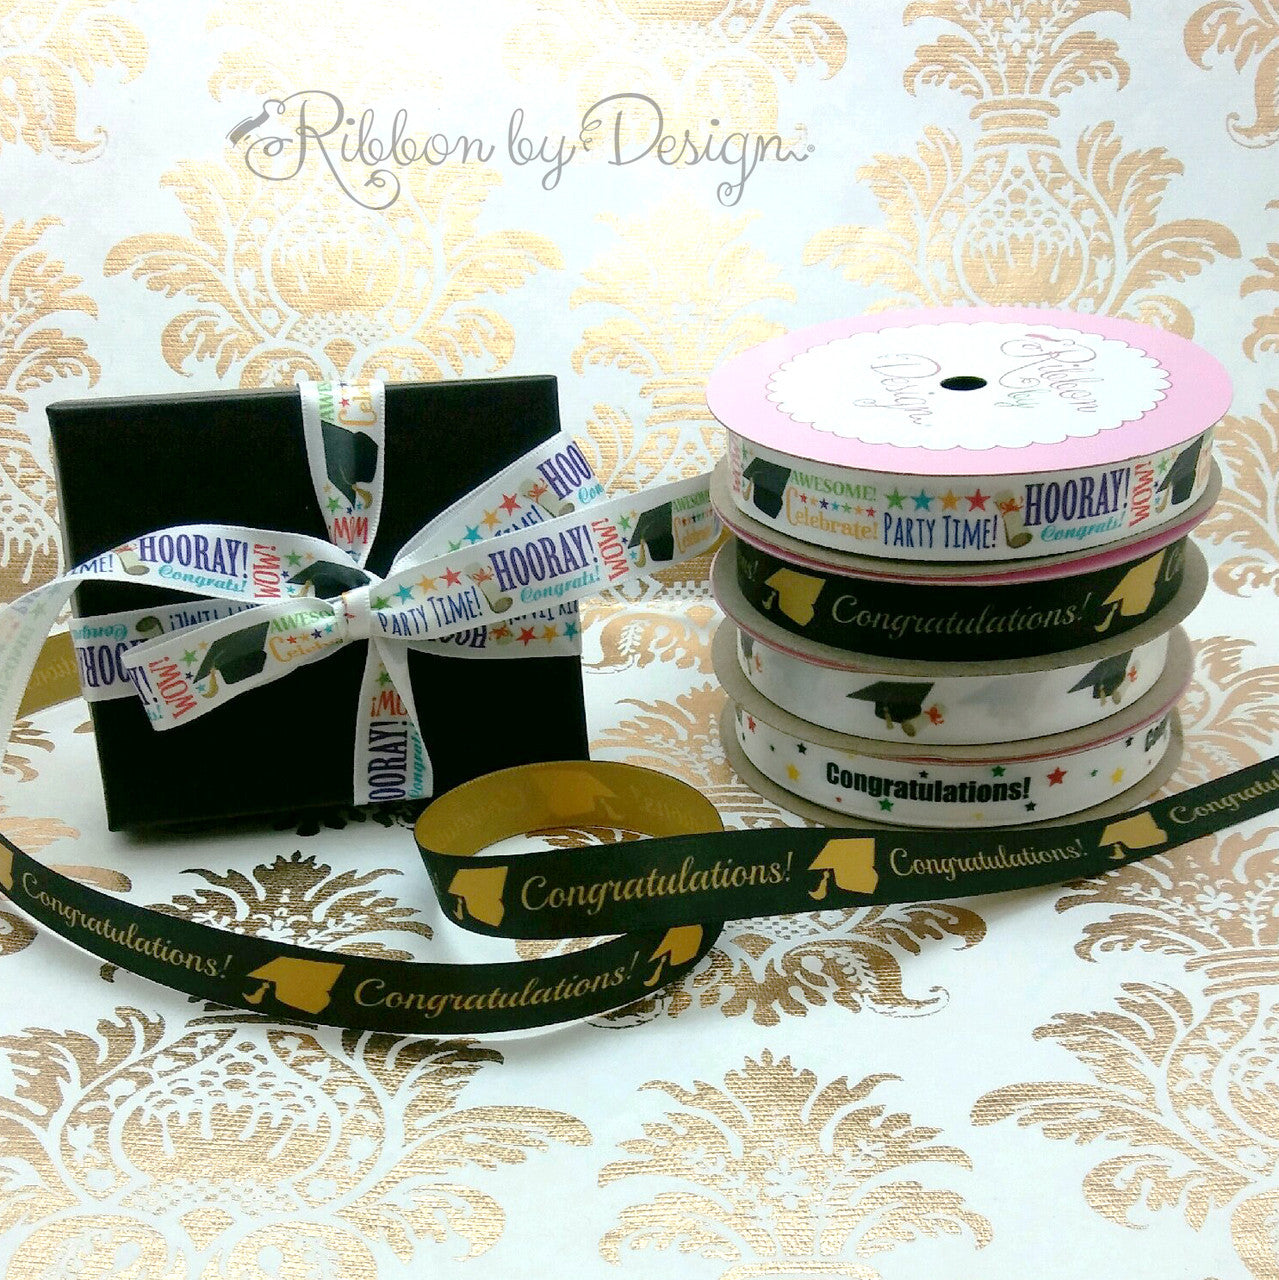 All our graduation themed ribbons work together as a collection! Mix and match these ribbons to make the most of the party!